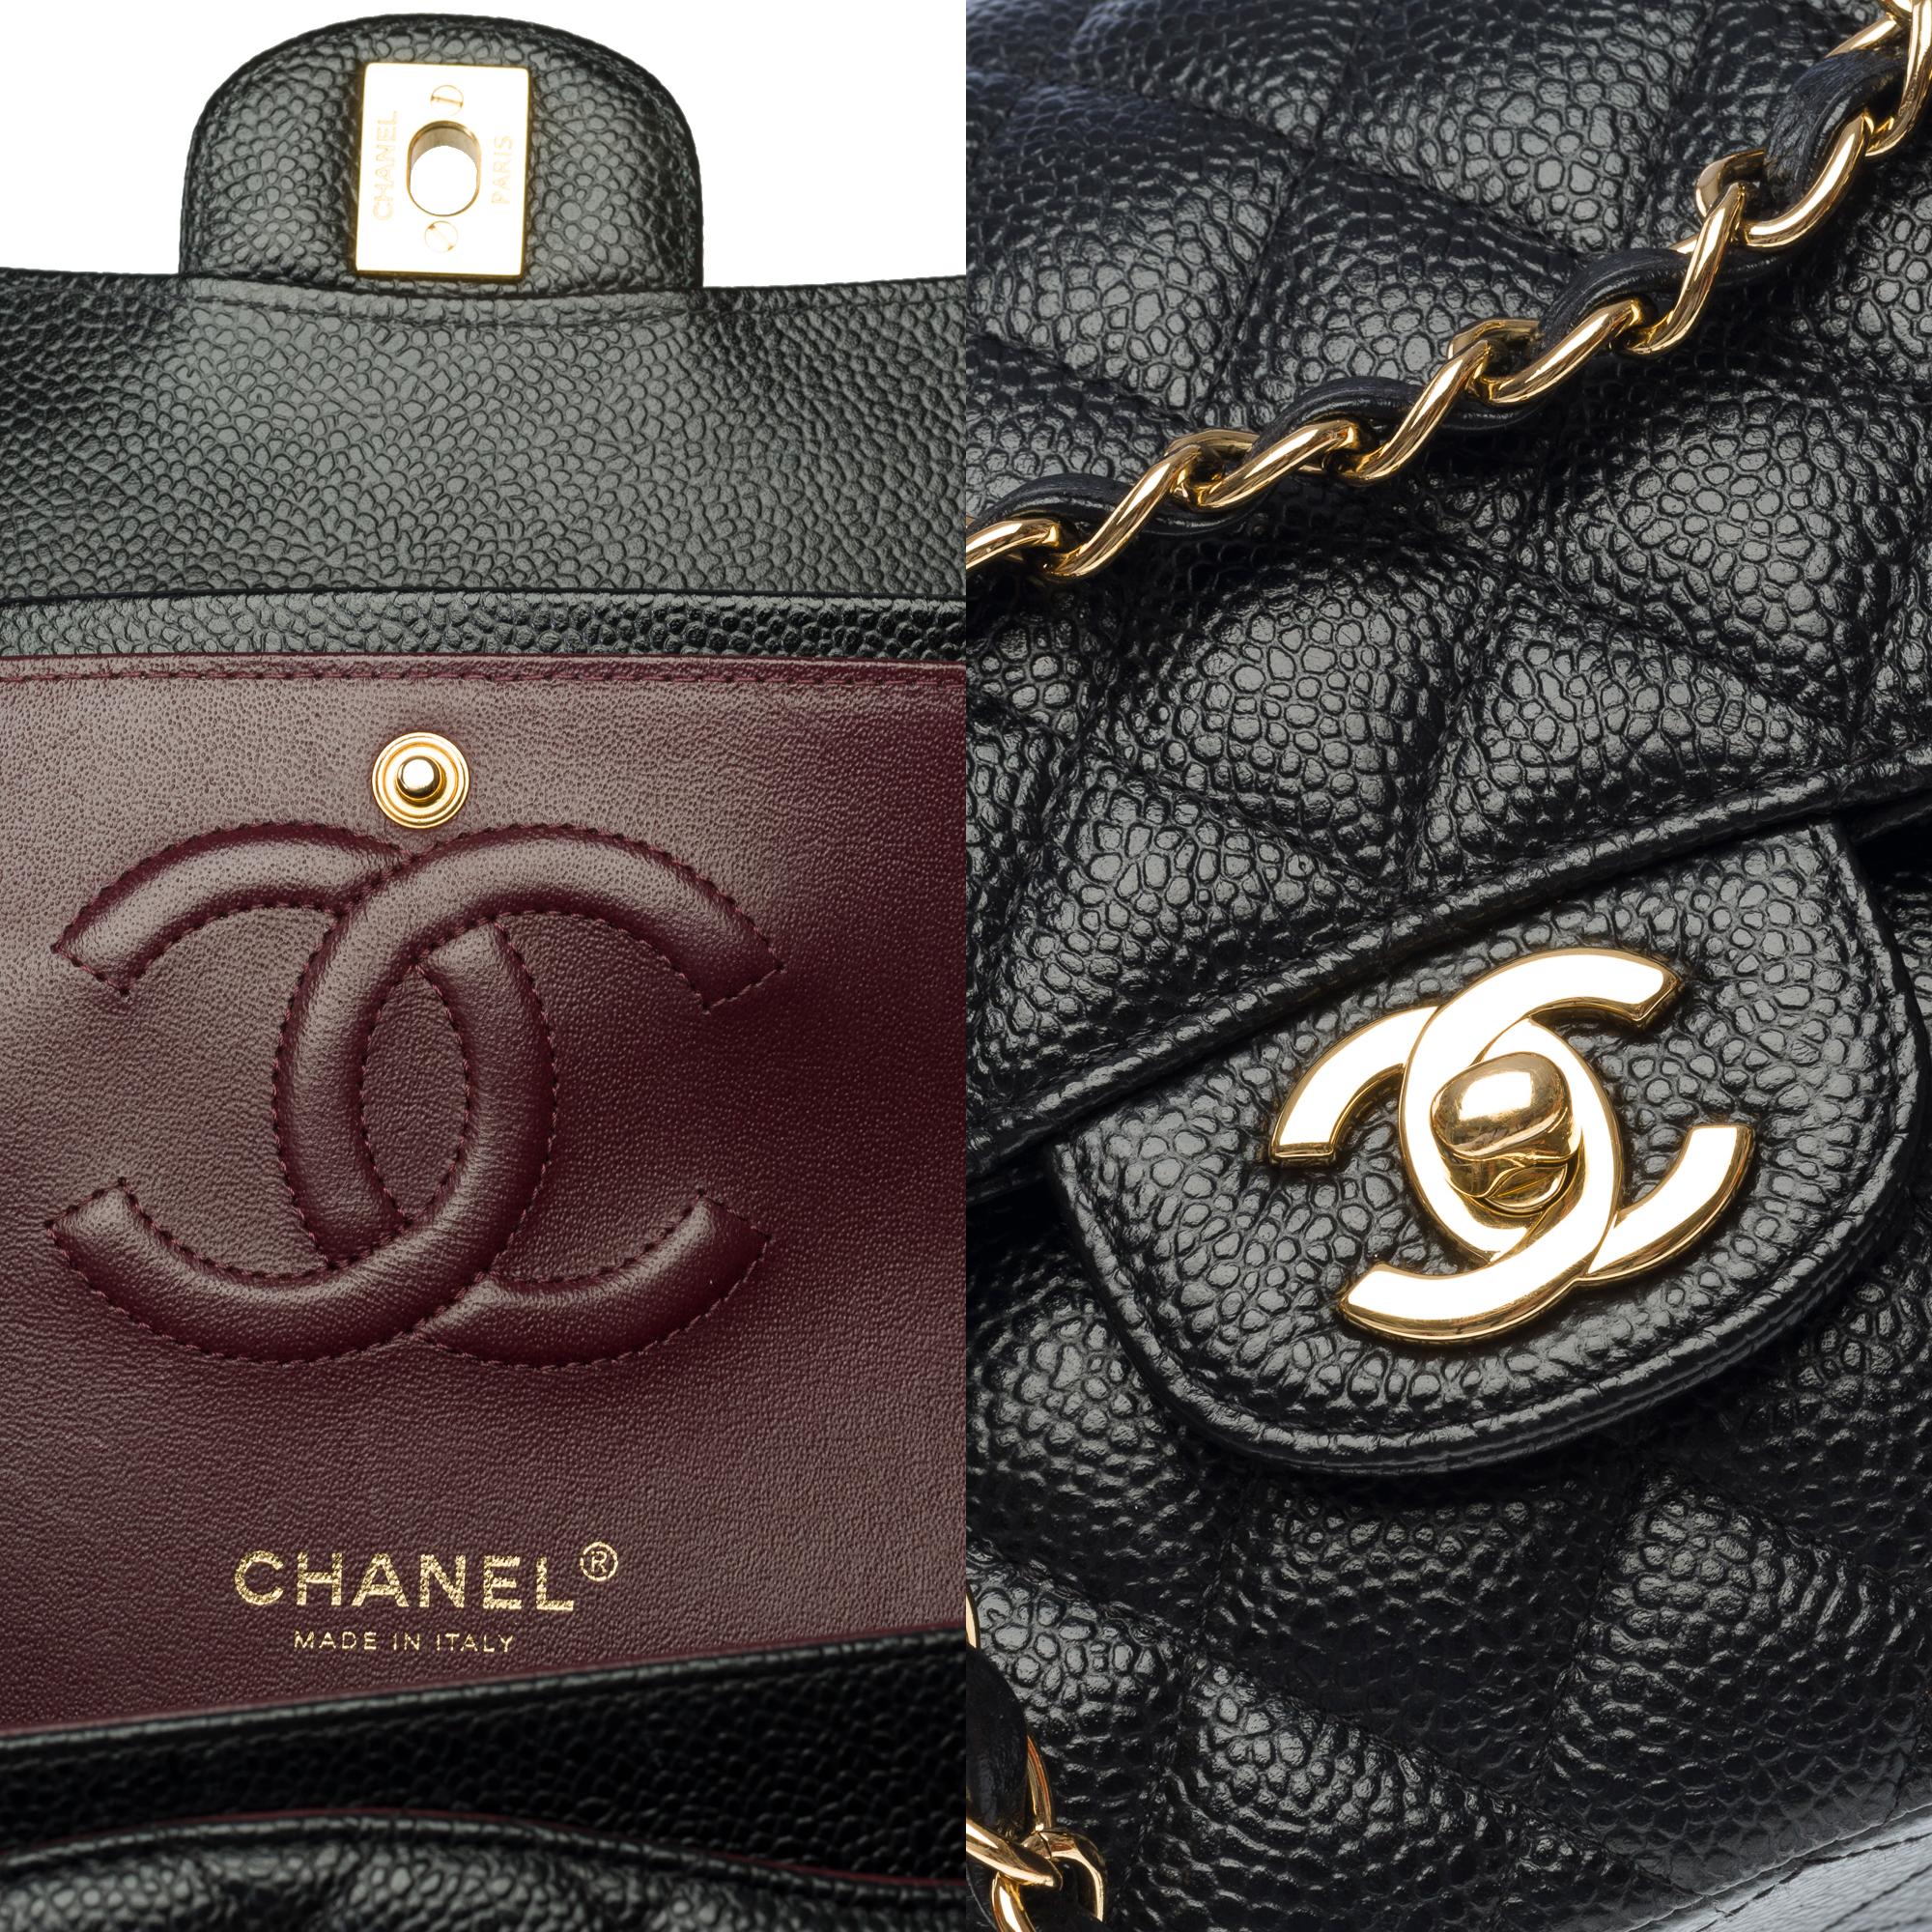 Chanel Timeless double flap shoulder bag in Black Quilted Caviar leather, GHW 3